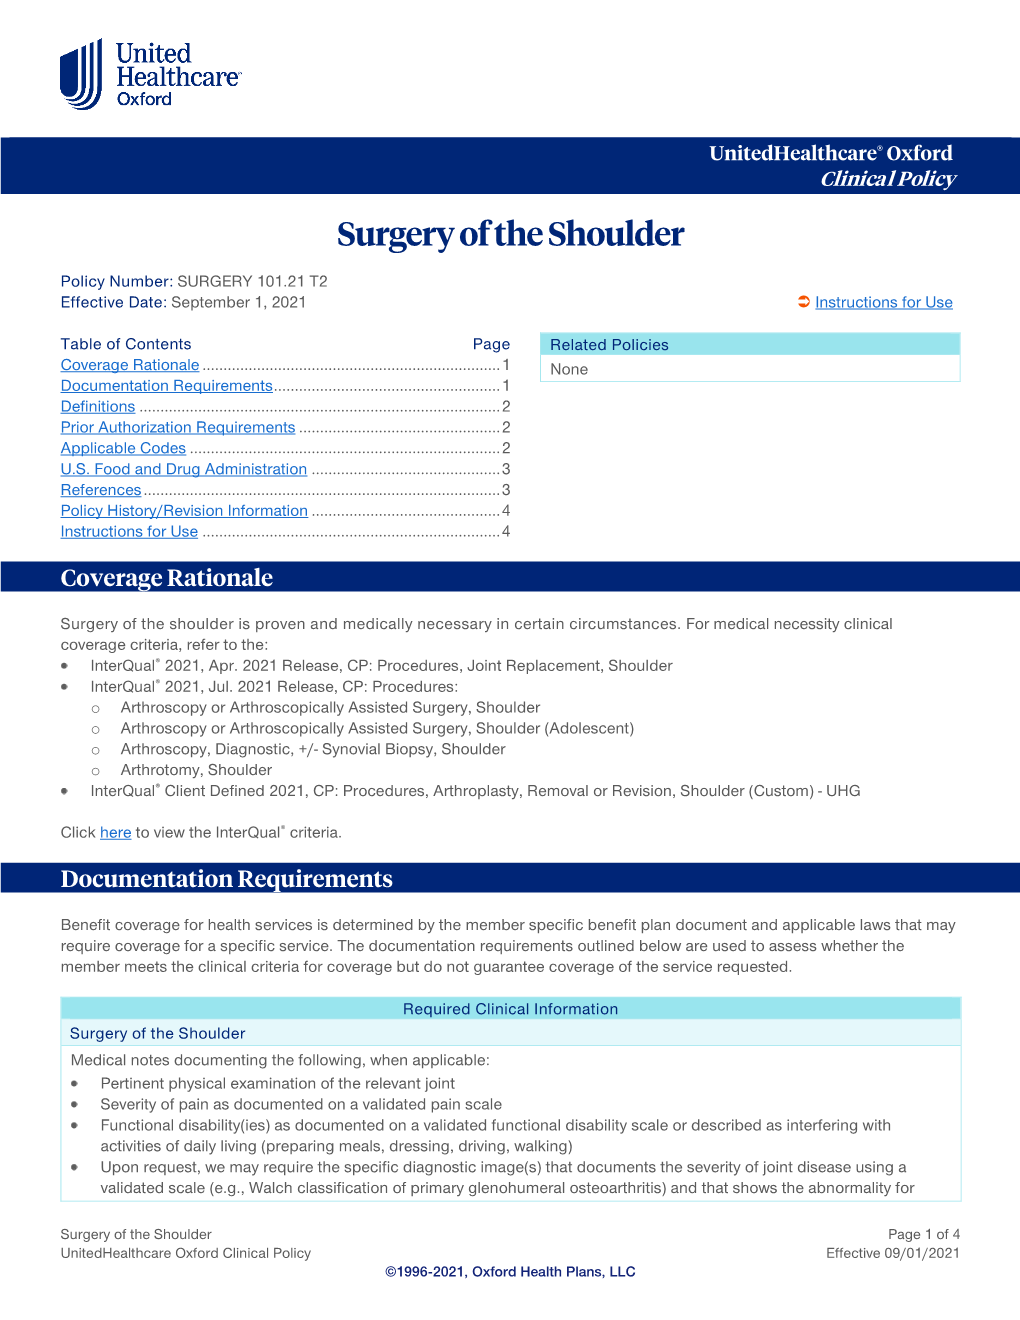 Surgery of the Shoulder – Oxford Clinical Policy